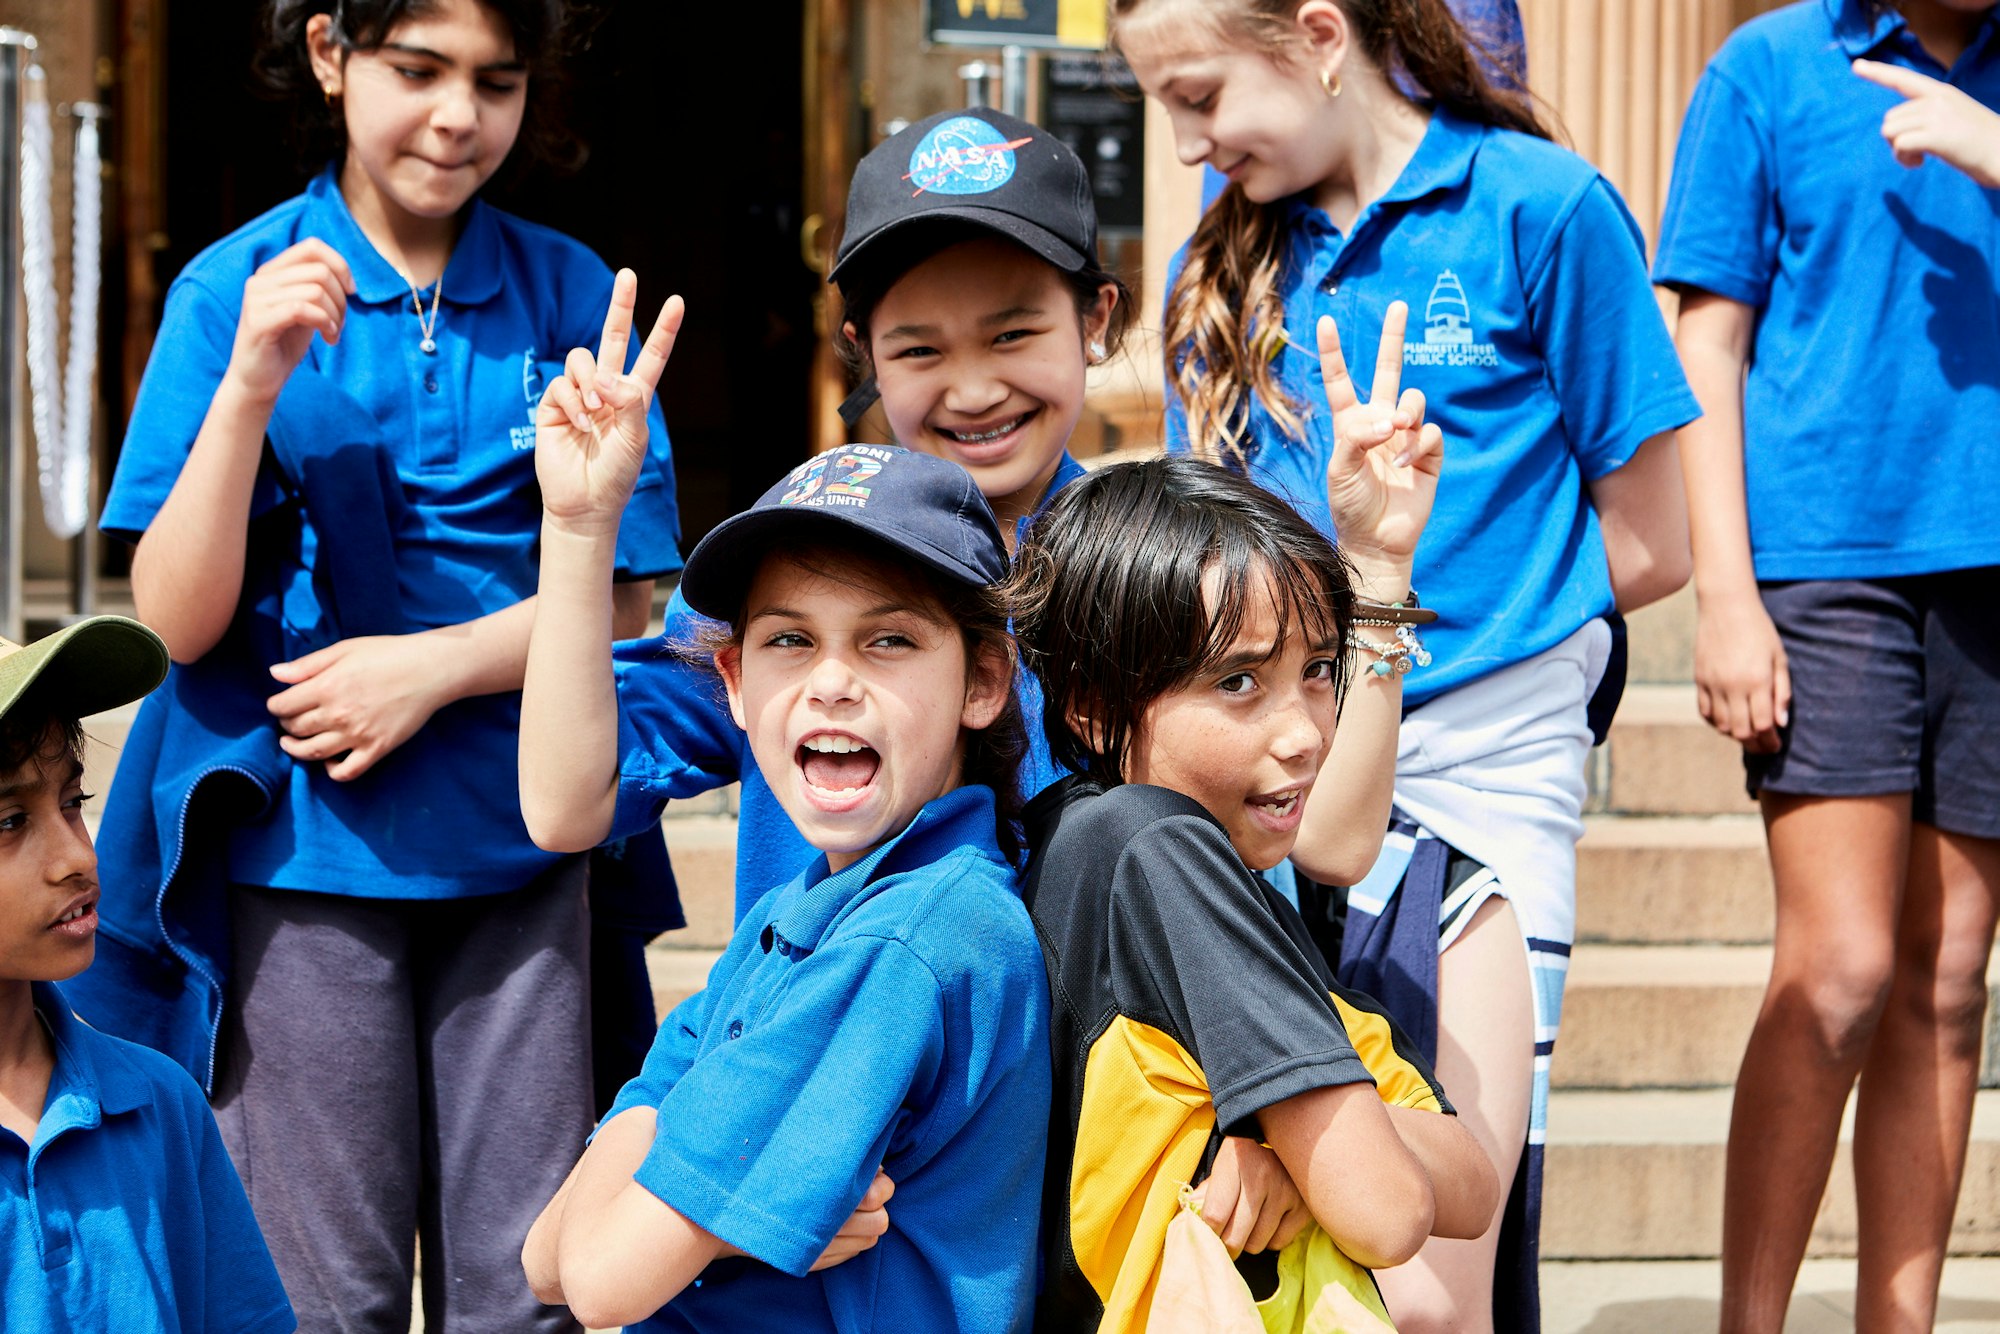 A group of several children, all but one dressed in the same blue collared t-shirt. Two of the kids stand back to back with arms crossed. Another stands behind them making a V sign with each hand.